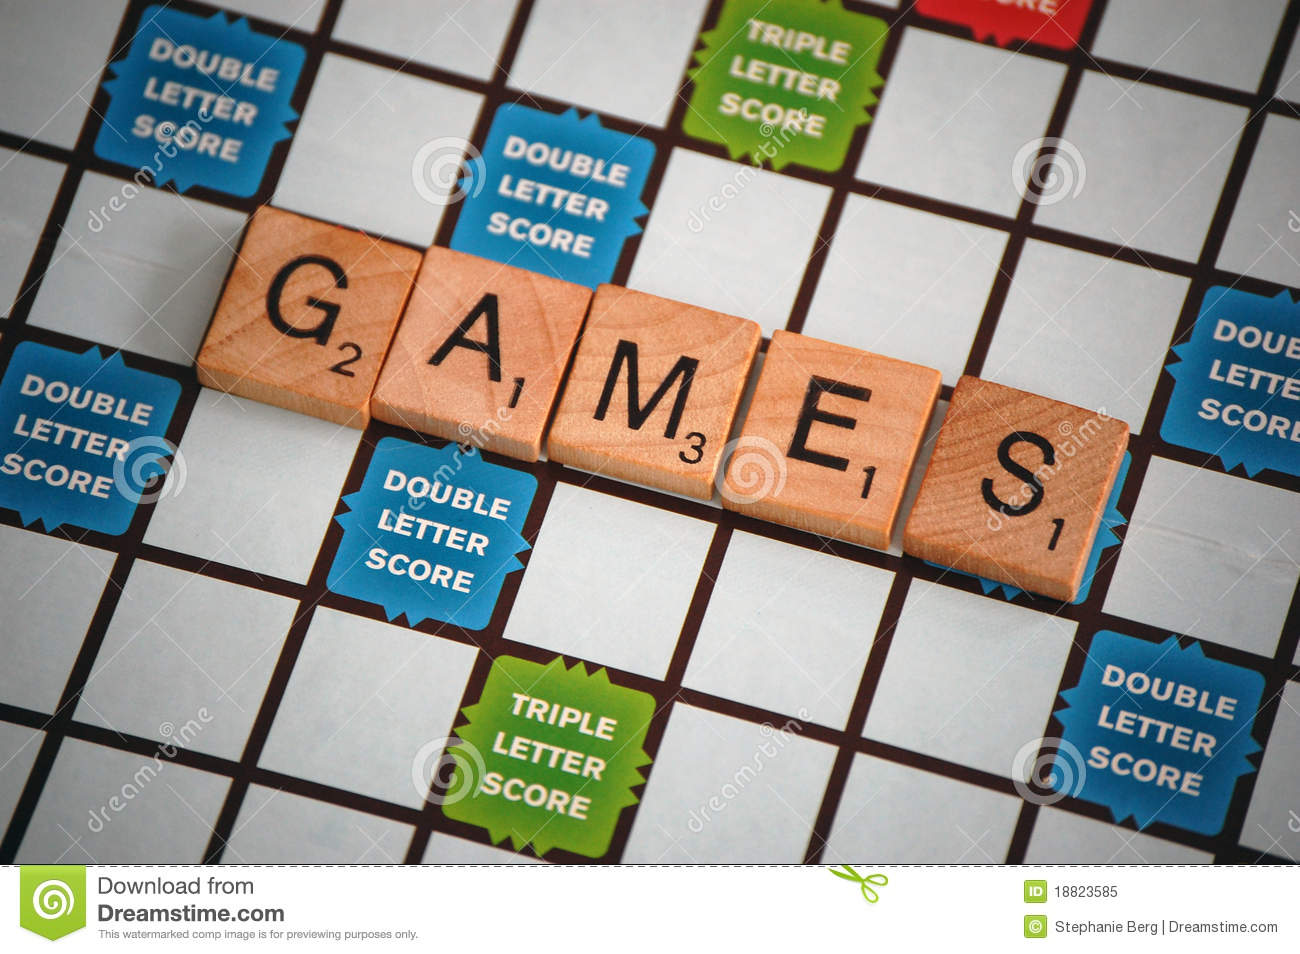 Game Of Scrabble With Word Games